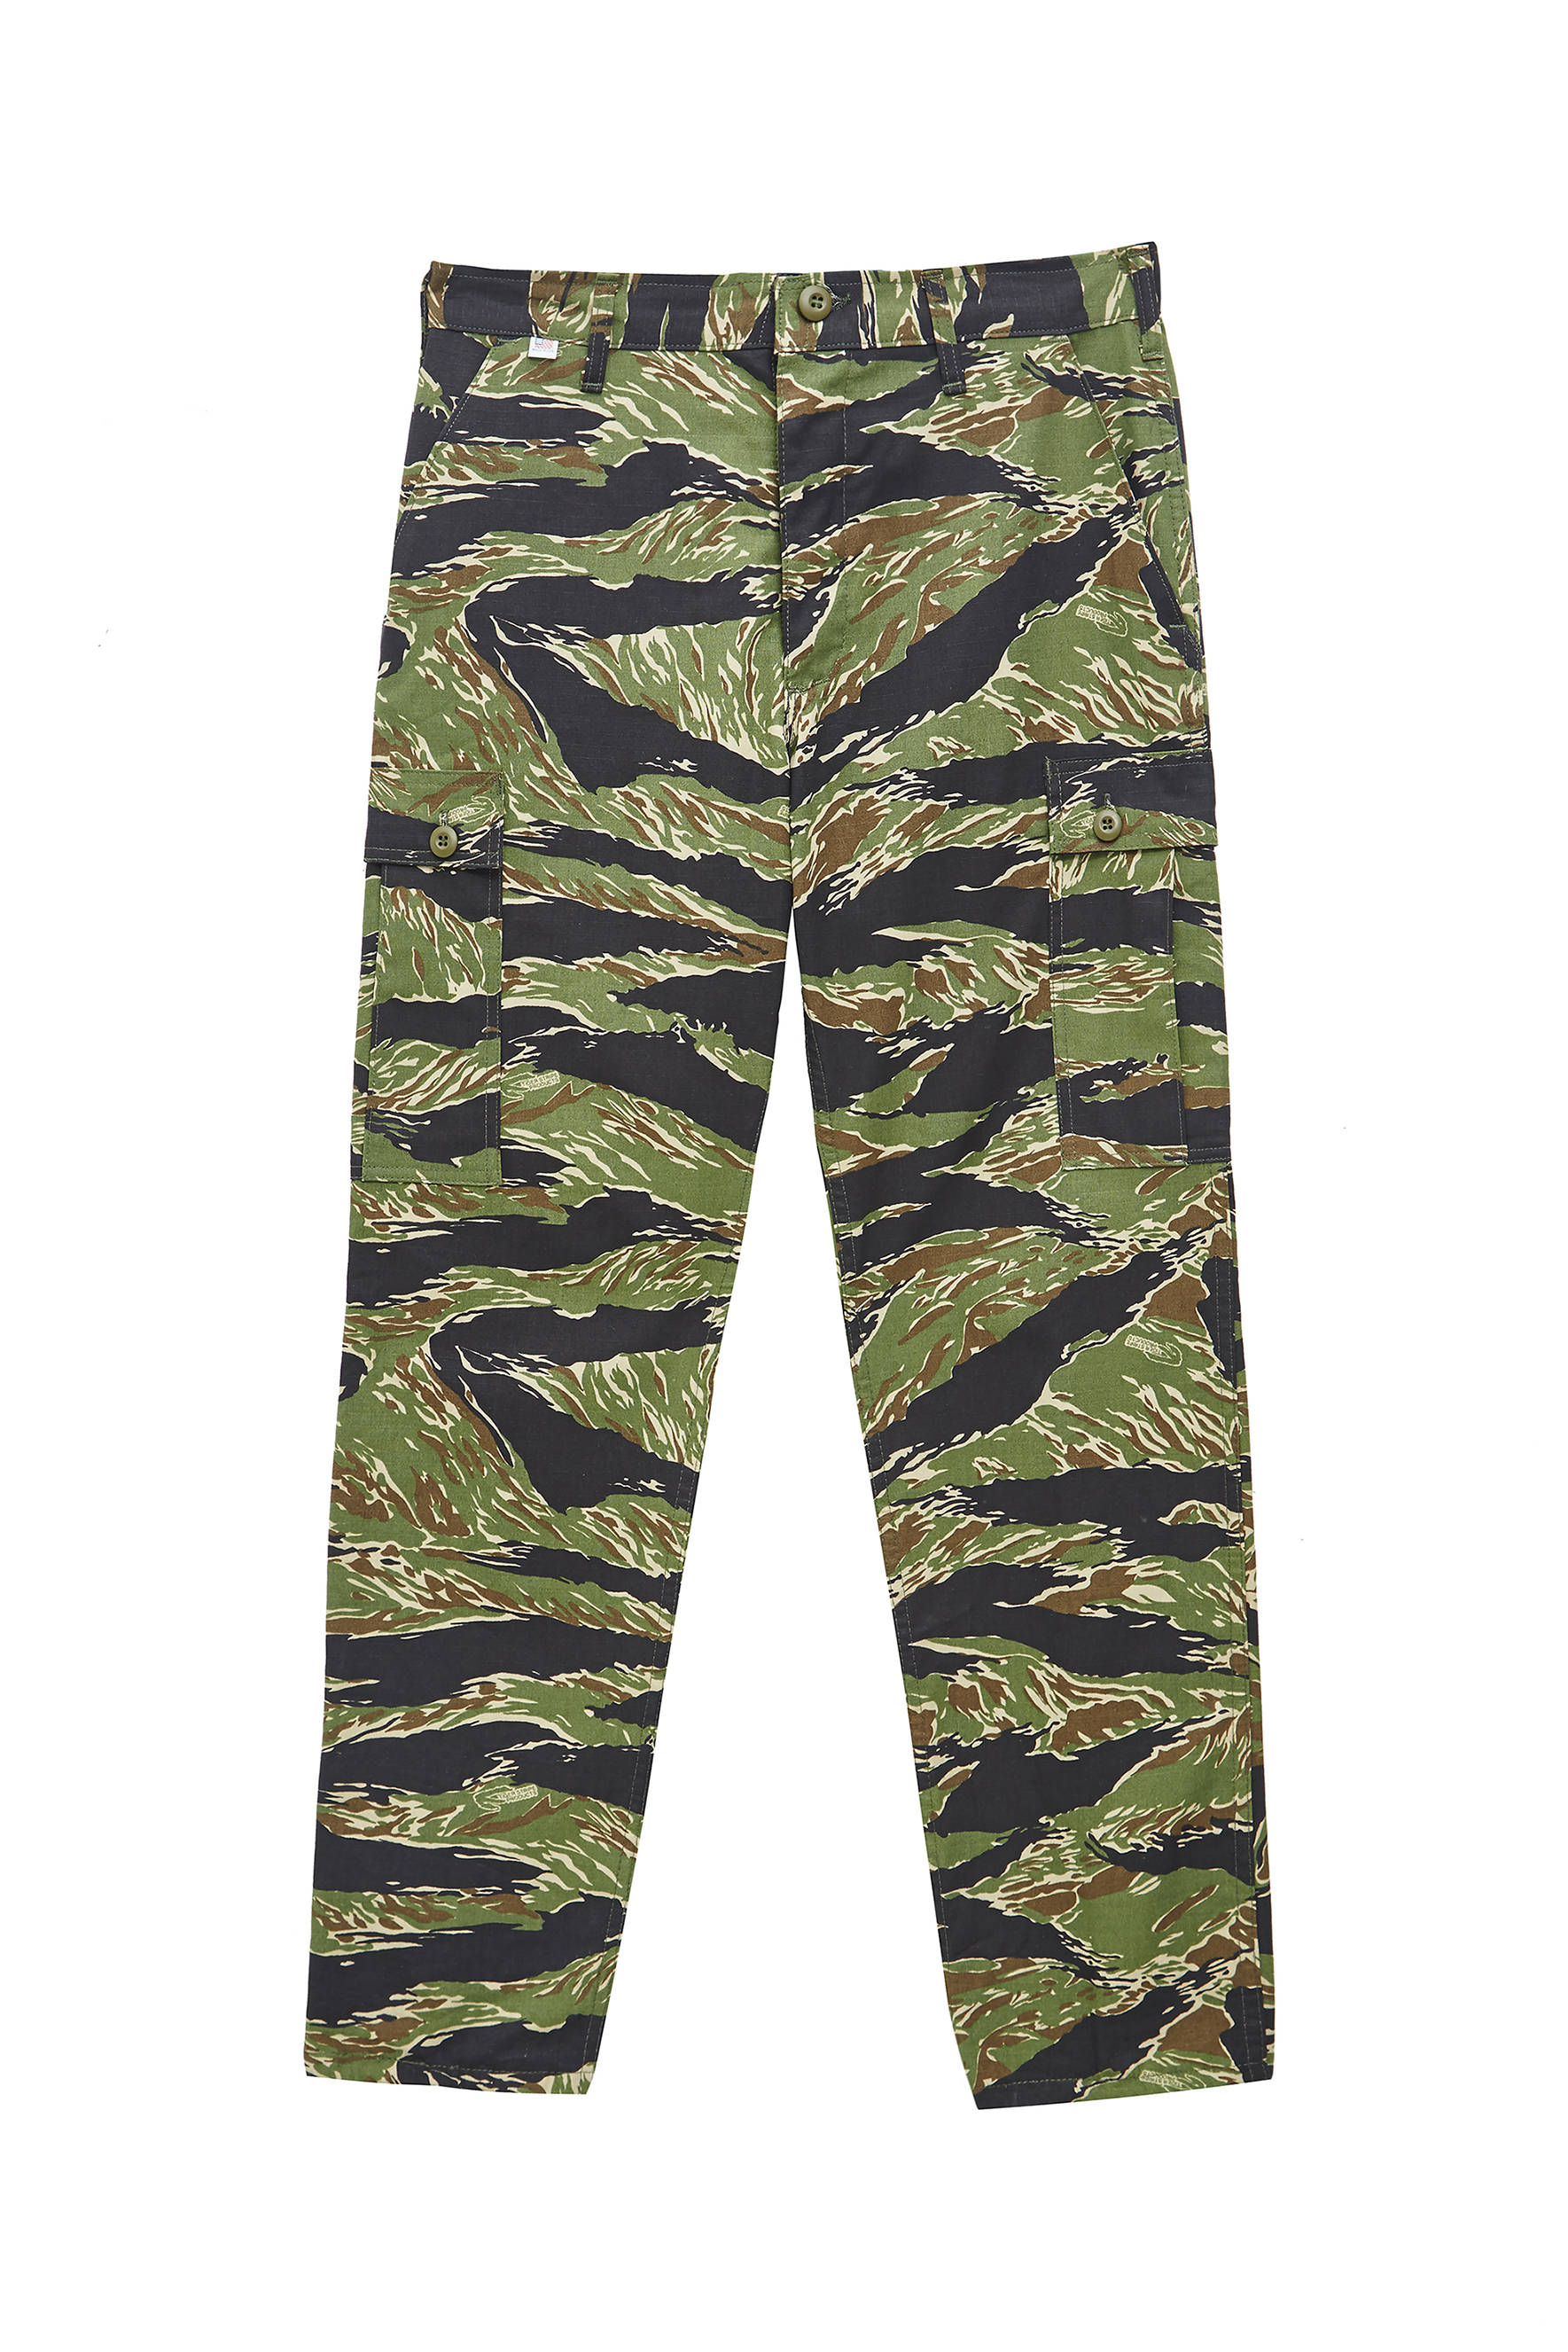 Stan Ray trousers at Urban Outfitters £65 or 90 euros (3)